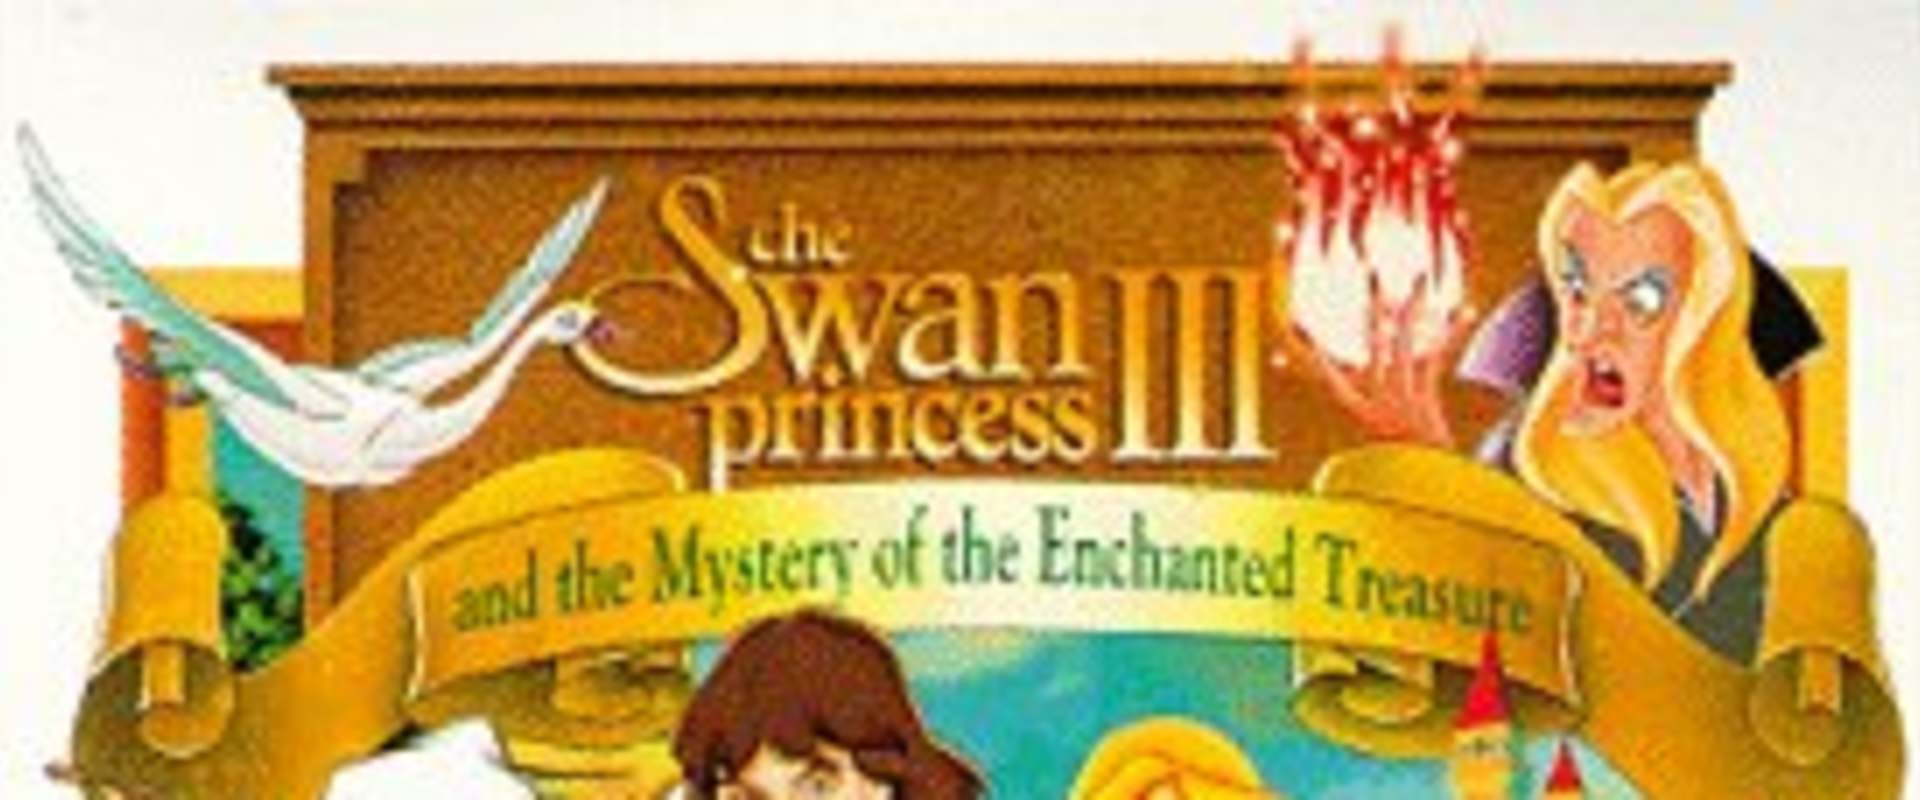 The Swan Princess: The Mystery of the Enchanted Treasure background 1